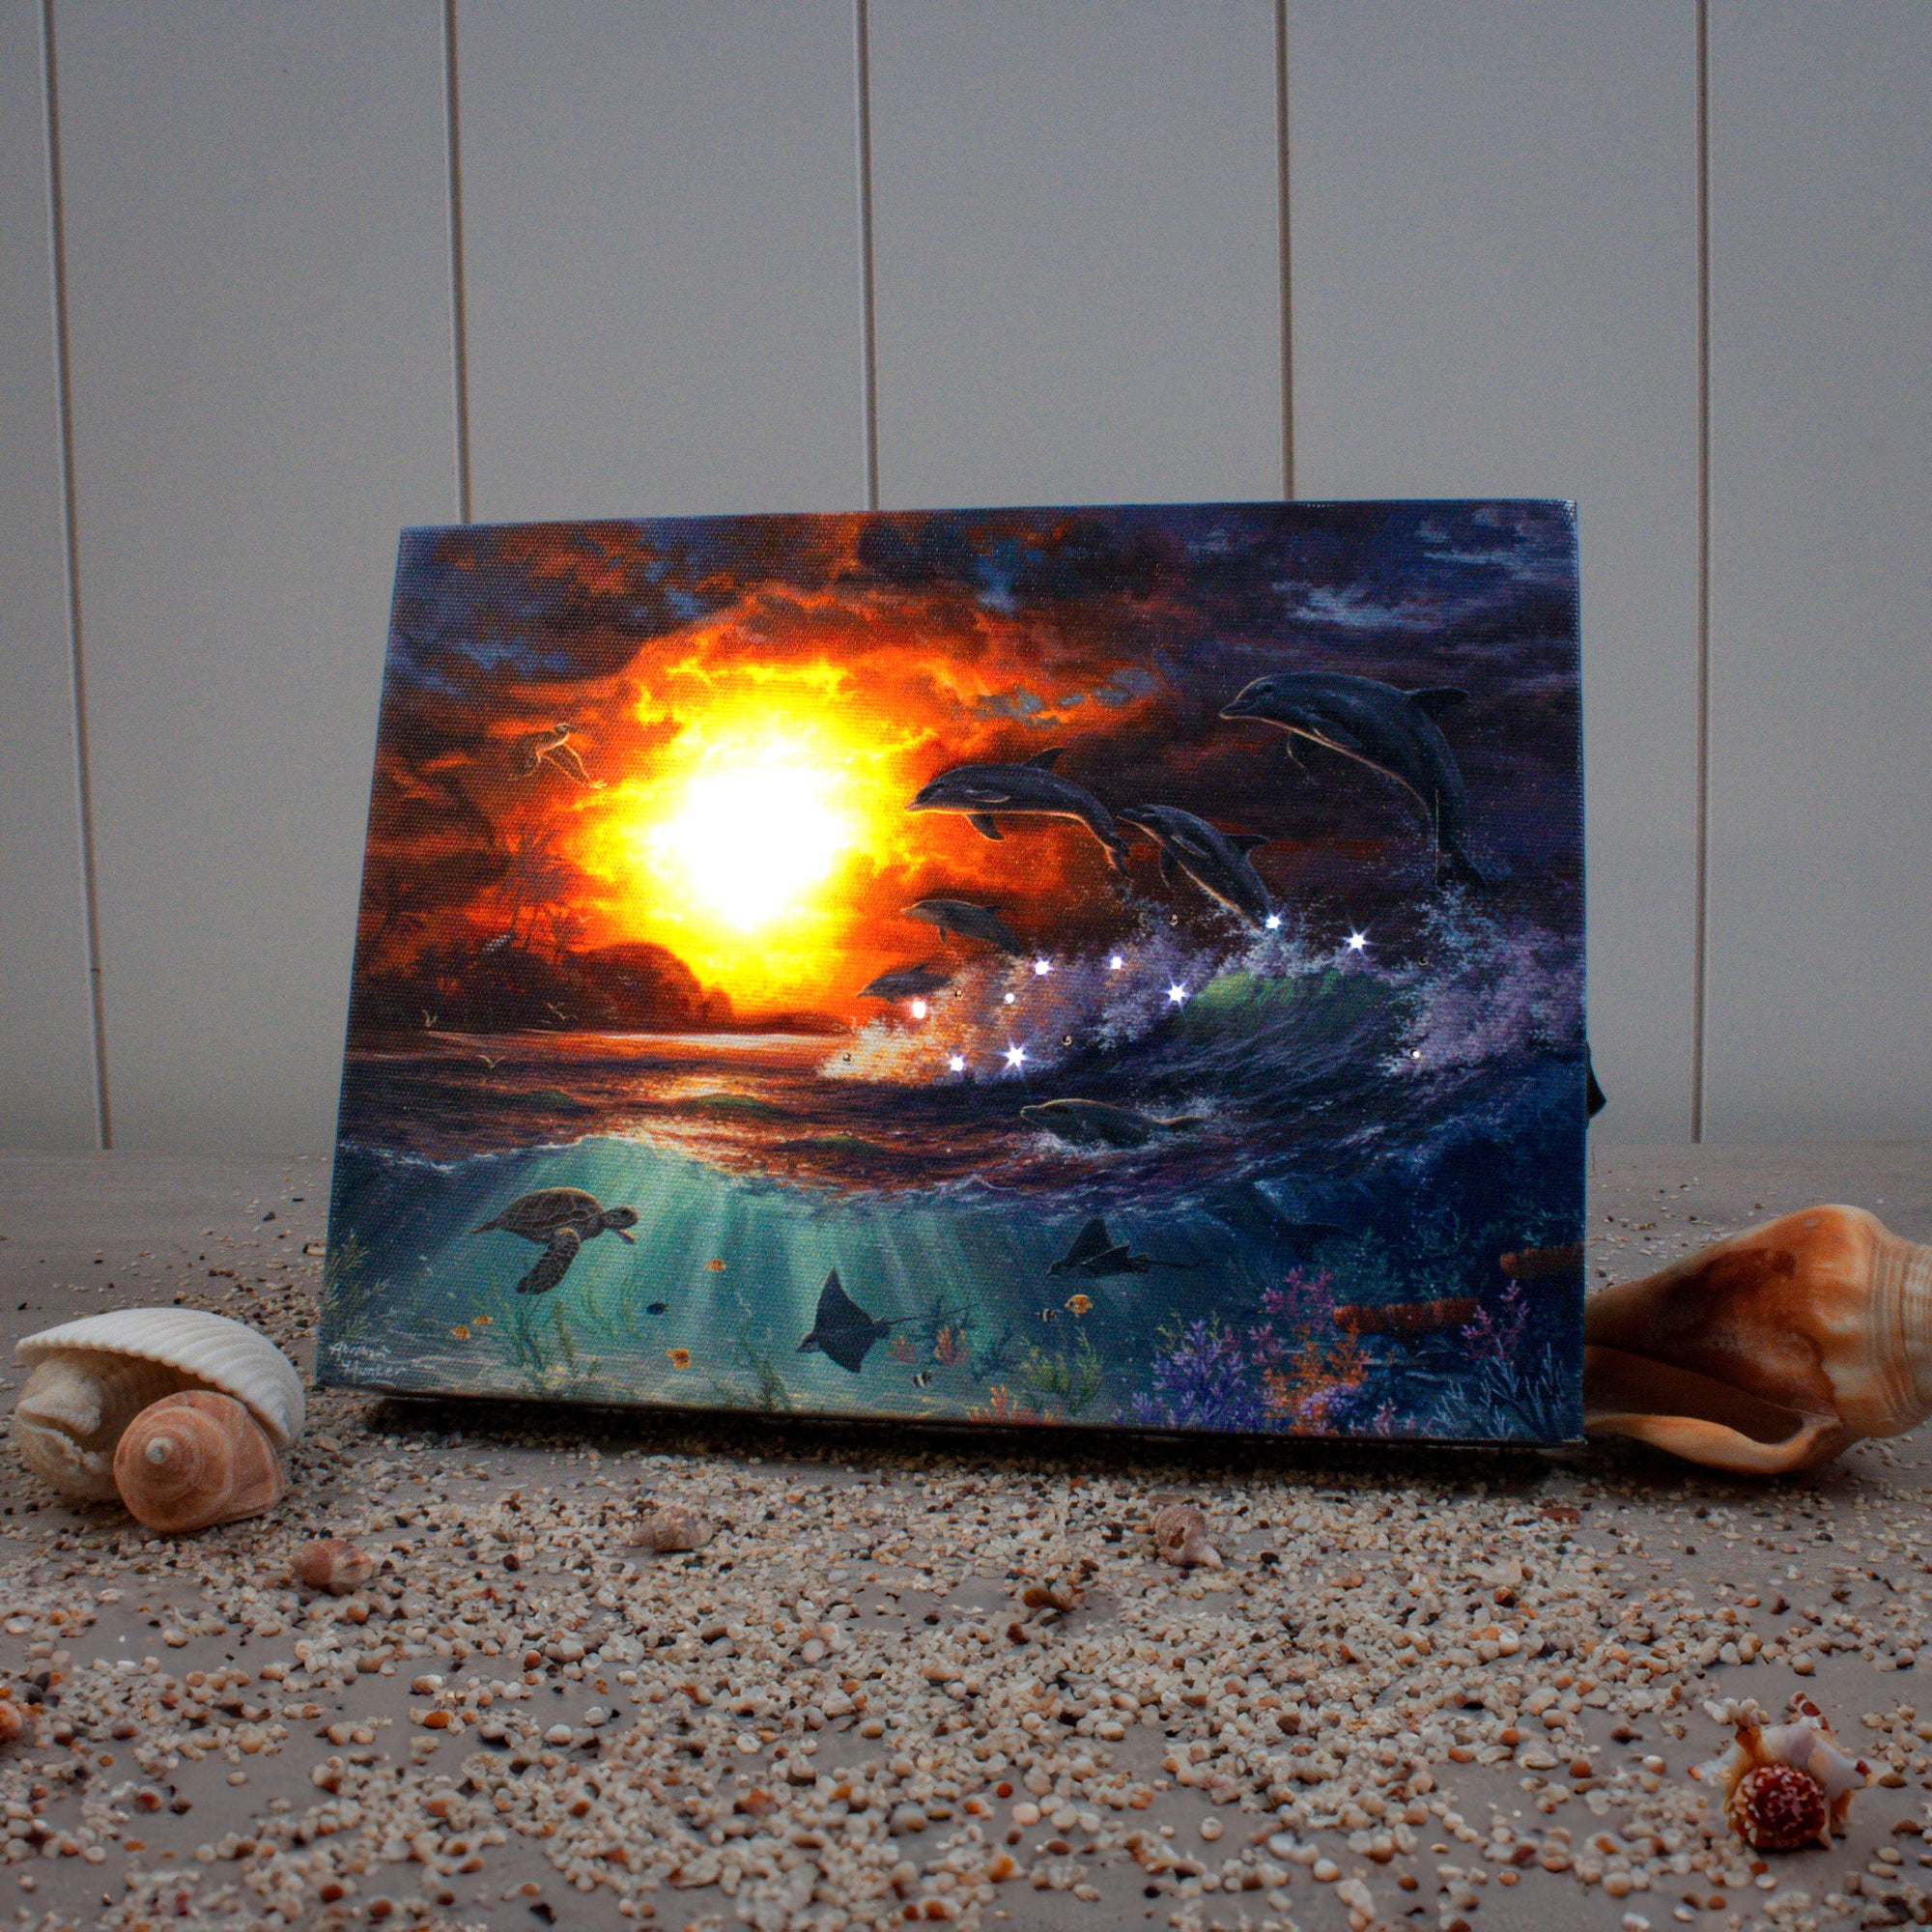 Beyond the Shore 8x6 Lighted Tabletop Canvas